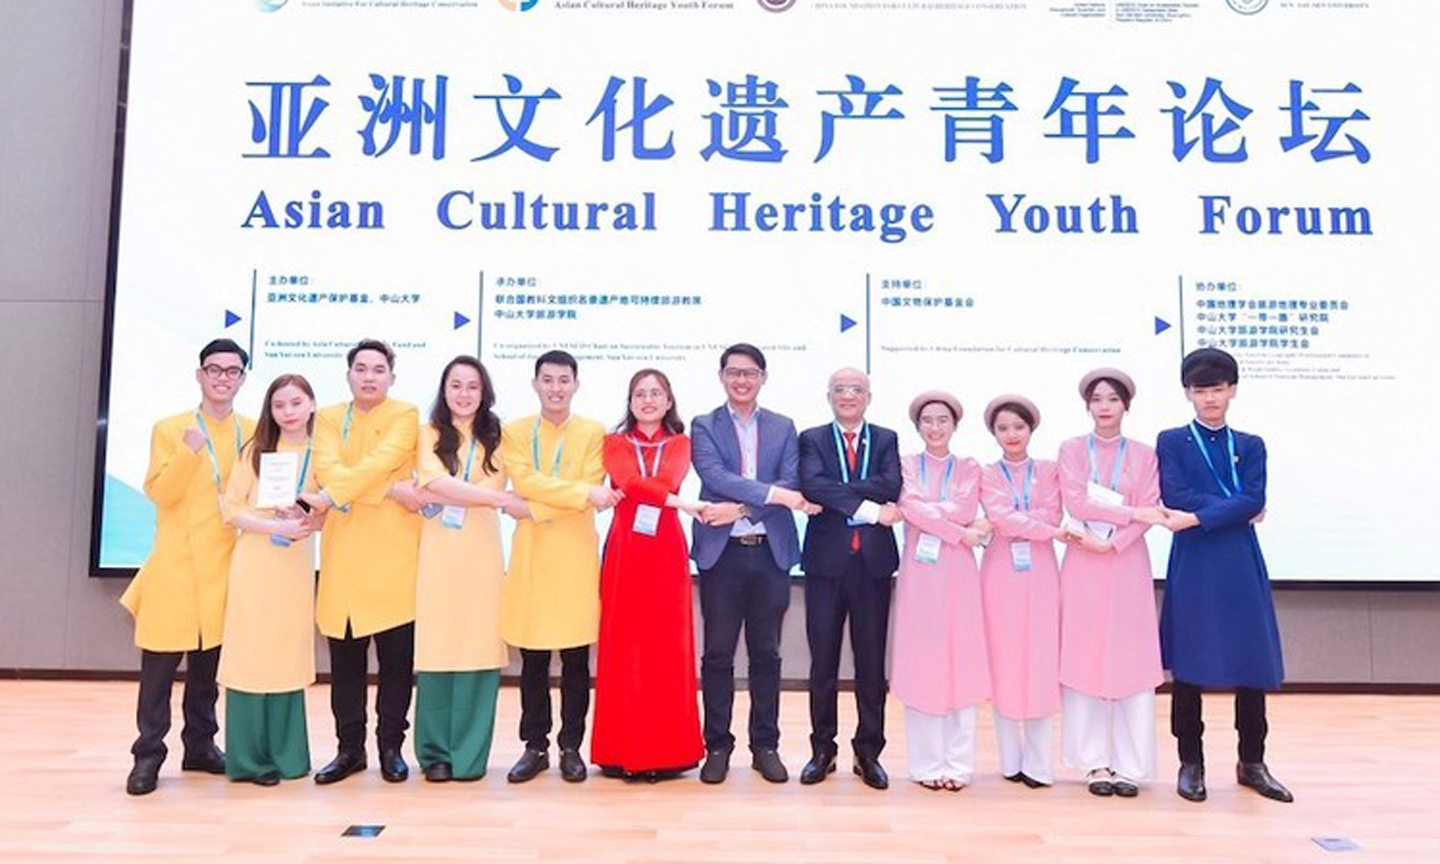 ABO/NDO- Students from Hoa Binh University won the third prize and a consolation prize at a contest on preserving Asian cultural heritage, held by UNESCO in Guangdong province, China.